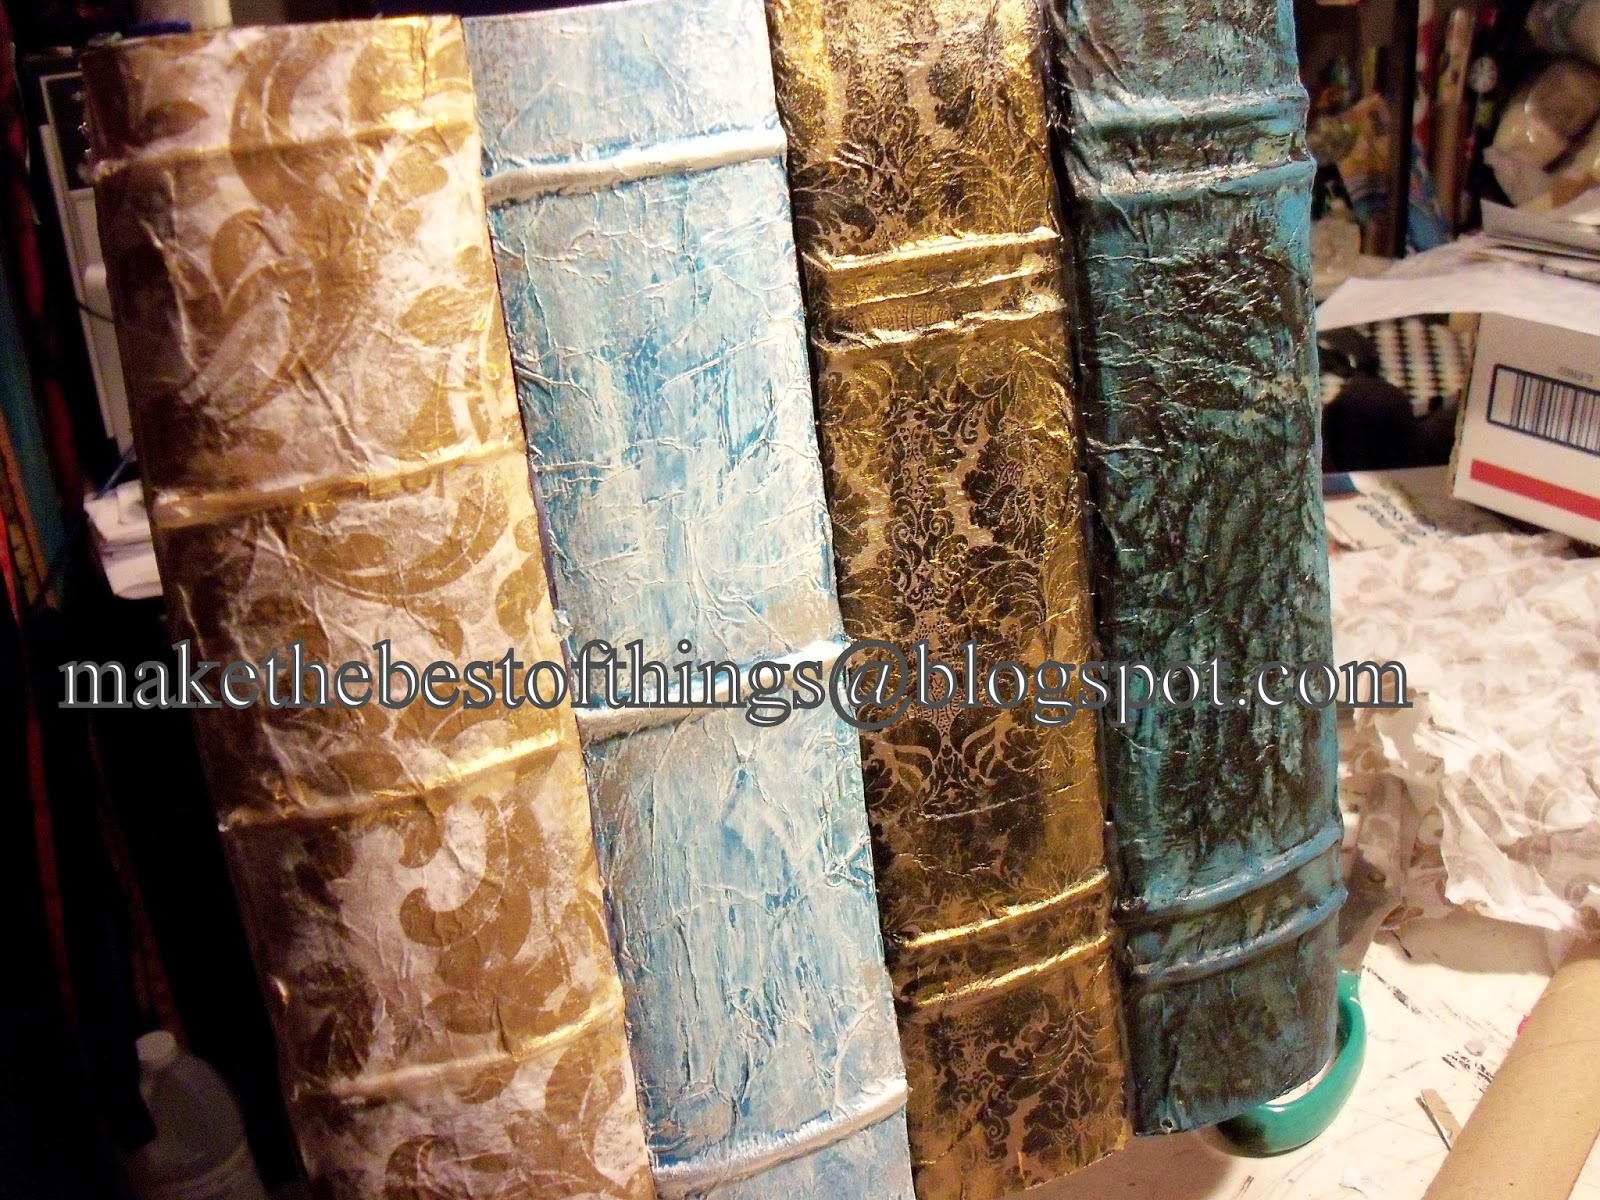 How-To: Vintage Book-Inspired Paper Mache Box - Make